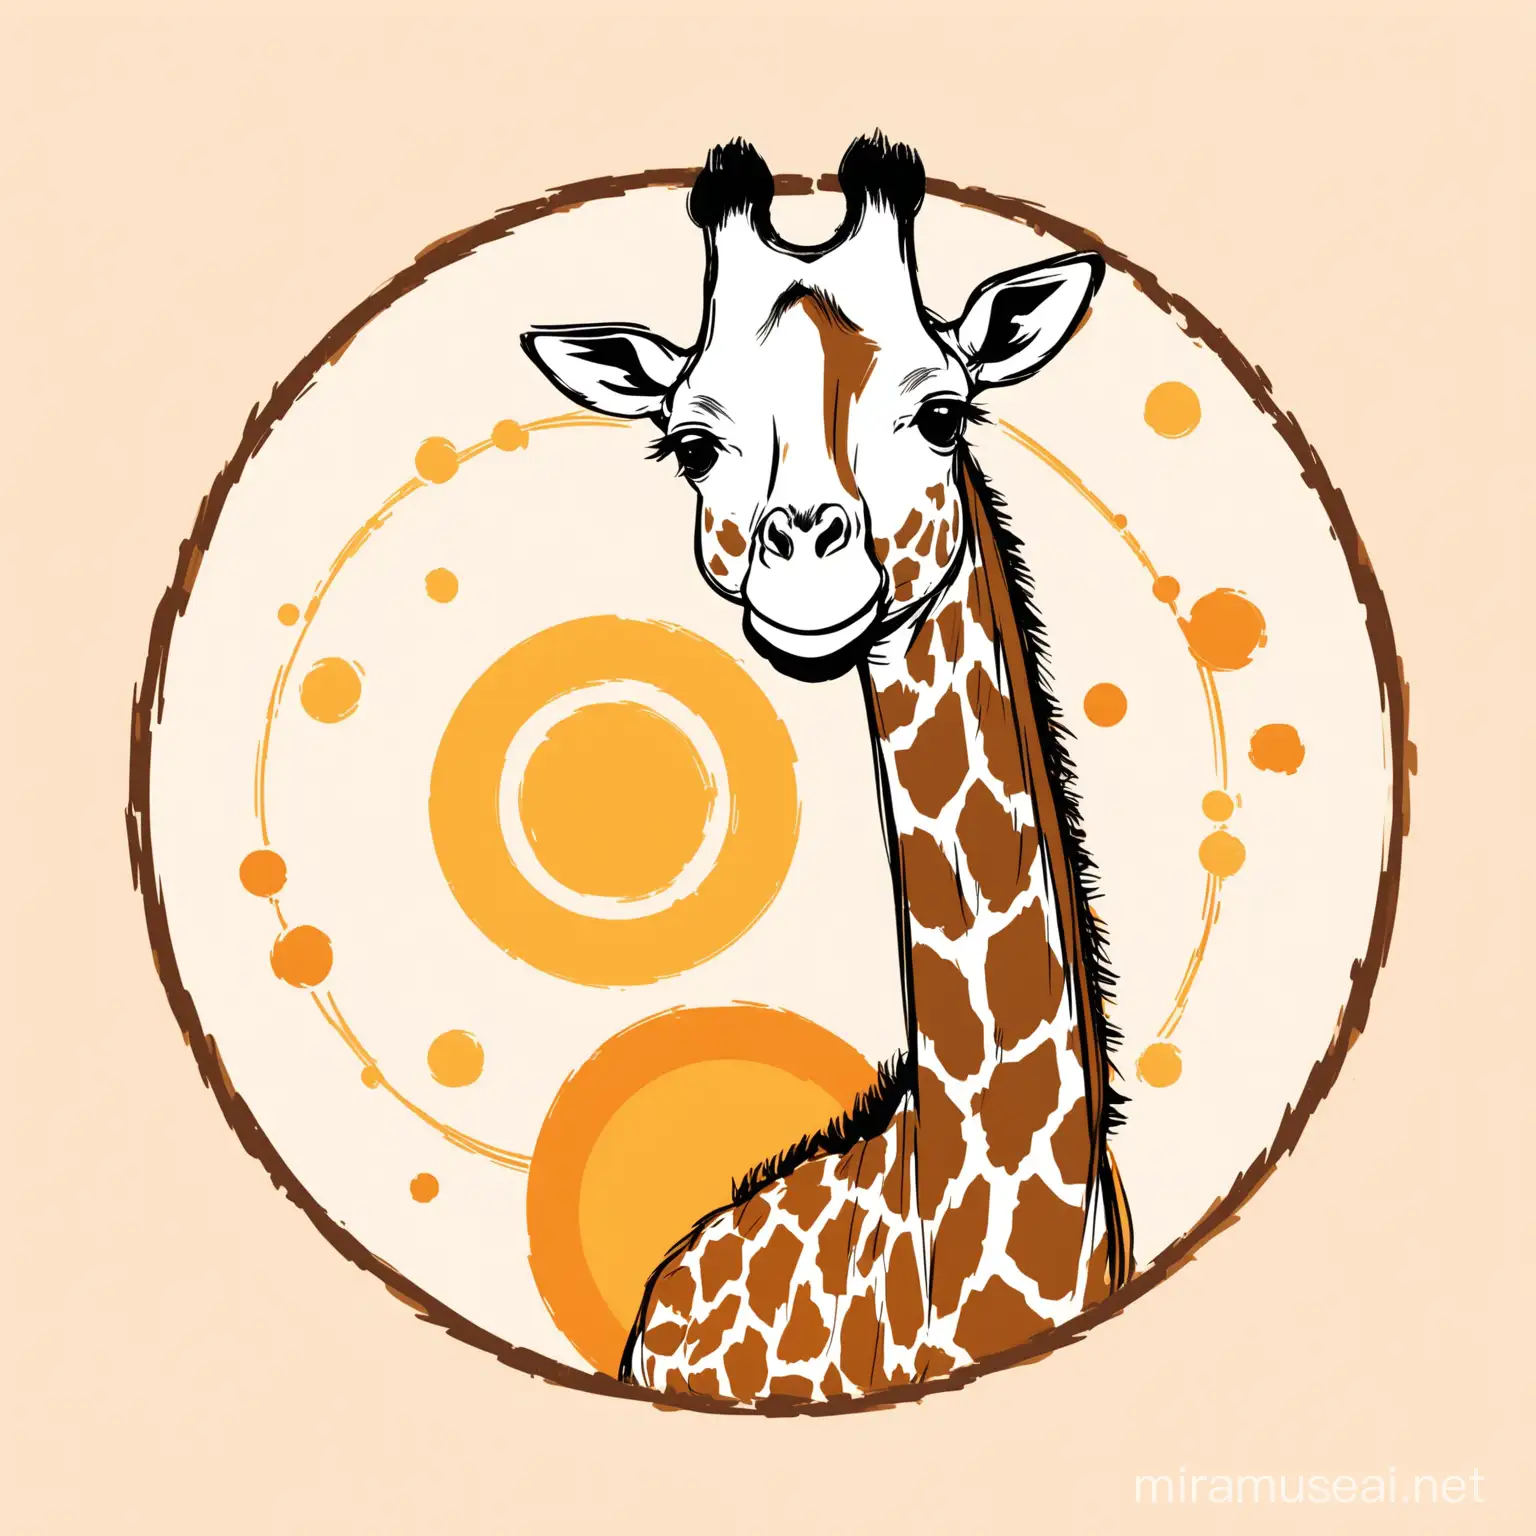 a logo showing a smiling giraffe in a circle with graph structures on it's fur